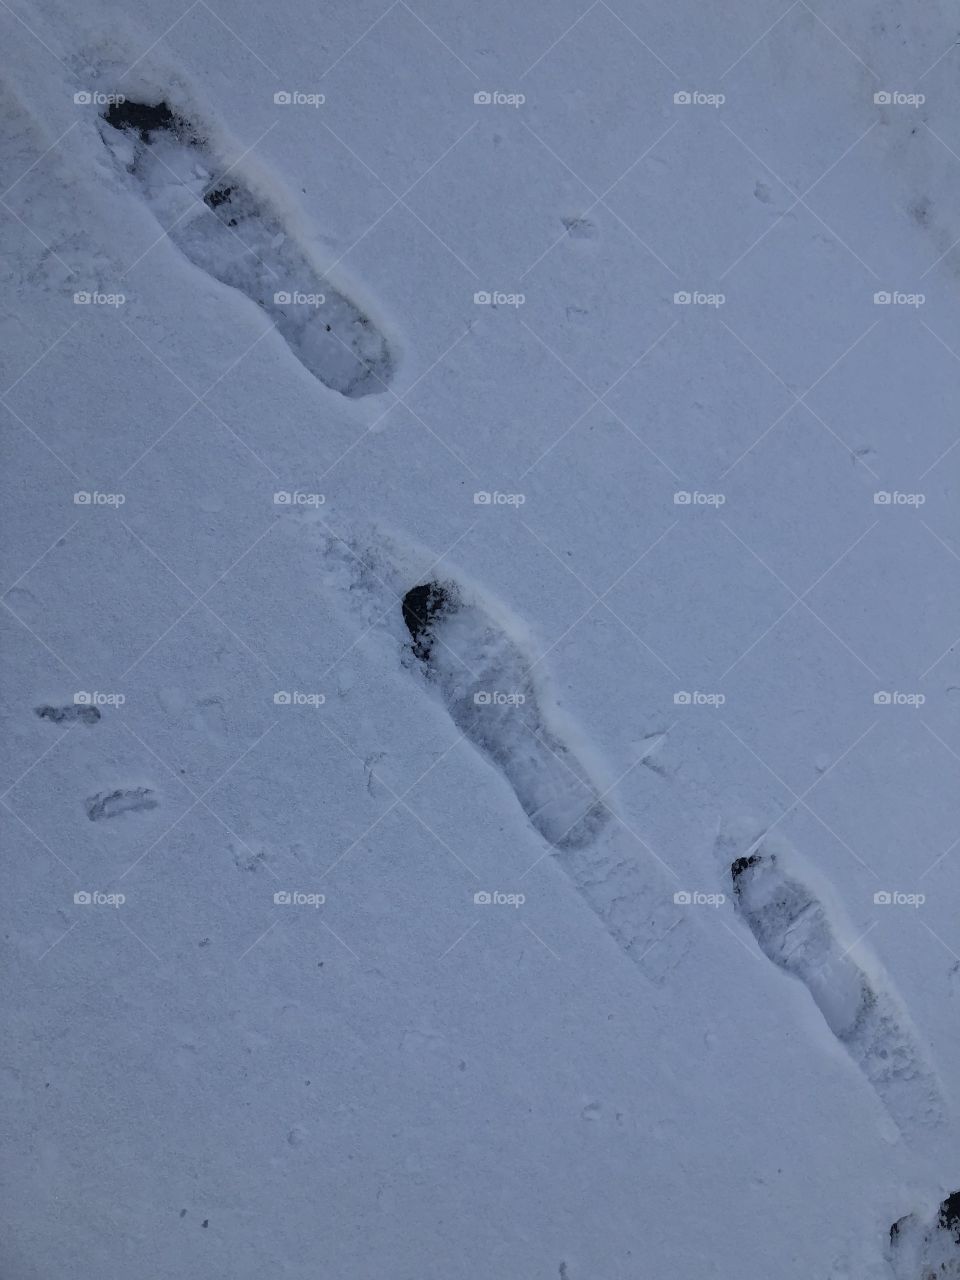 A set of snow footprints, pressed into the snow following the recent snowstorm. So much can be said about this photo, yet I’ll let you decide what to make of them.